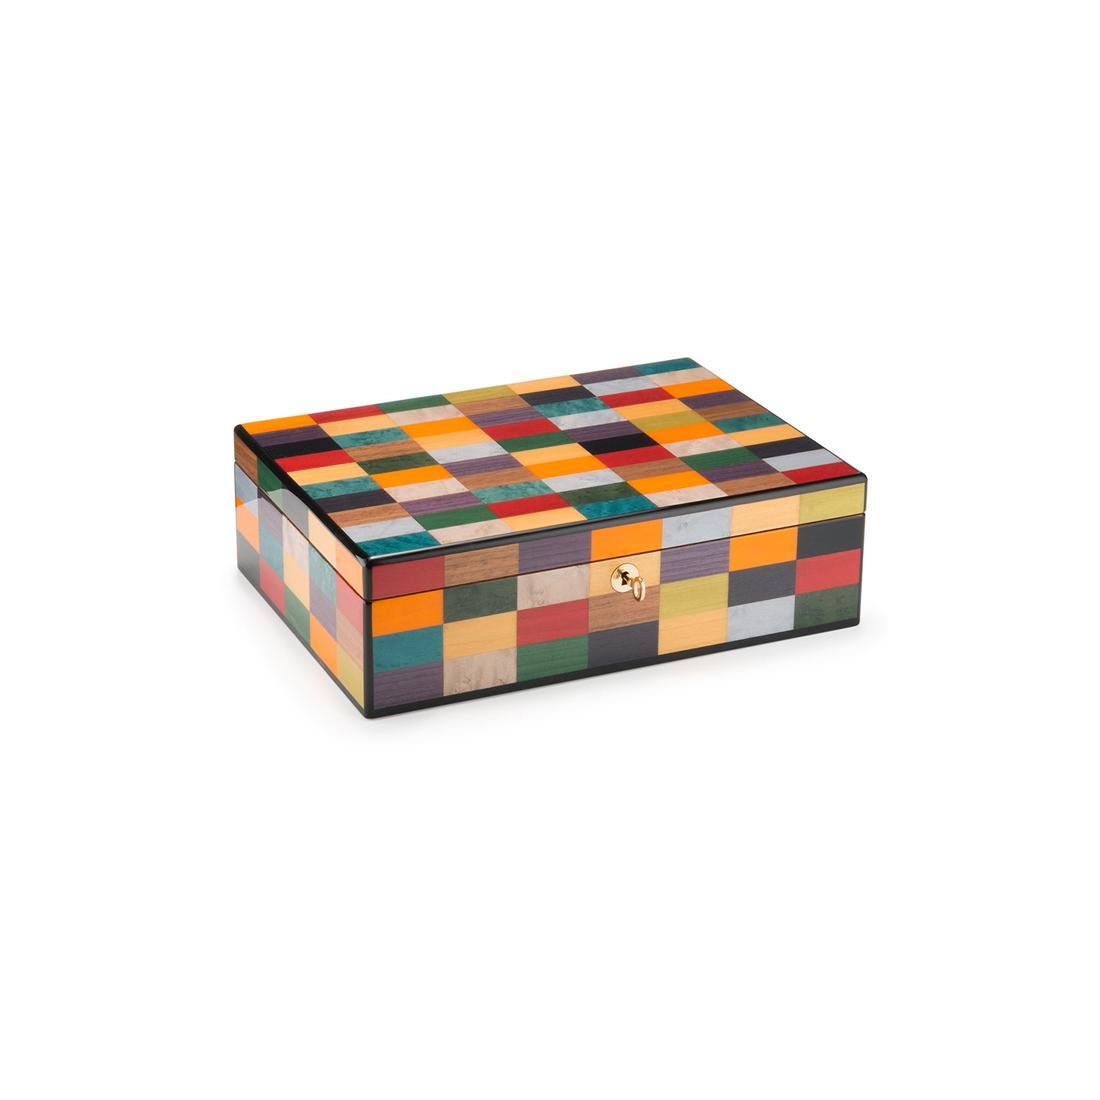 A splendid piece of functional decor fit for a private office or studio, this watch case is distinguished by an exquisite handmade inlay work of a series of colorful rectangles of modern inspiration. Enriched with gold-finished metal details, it is